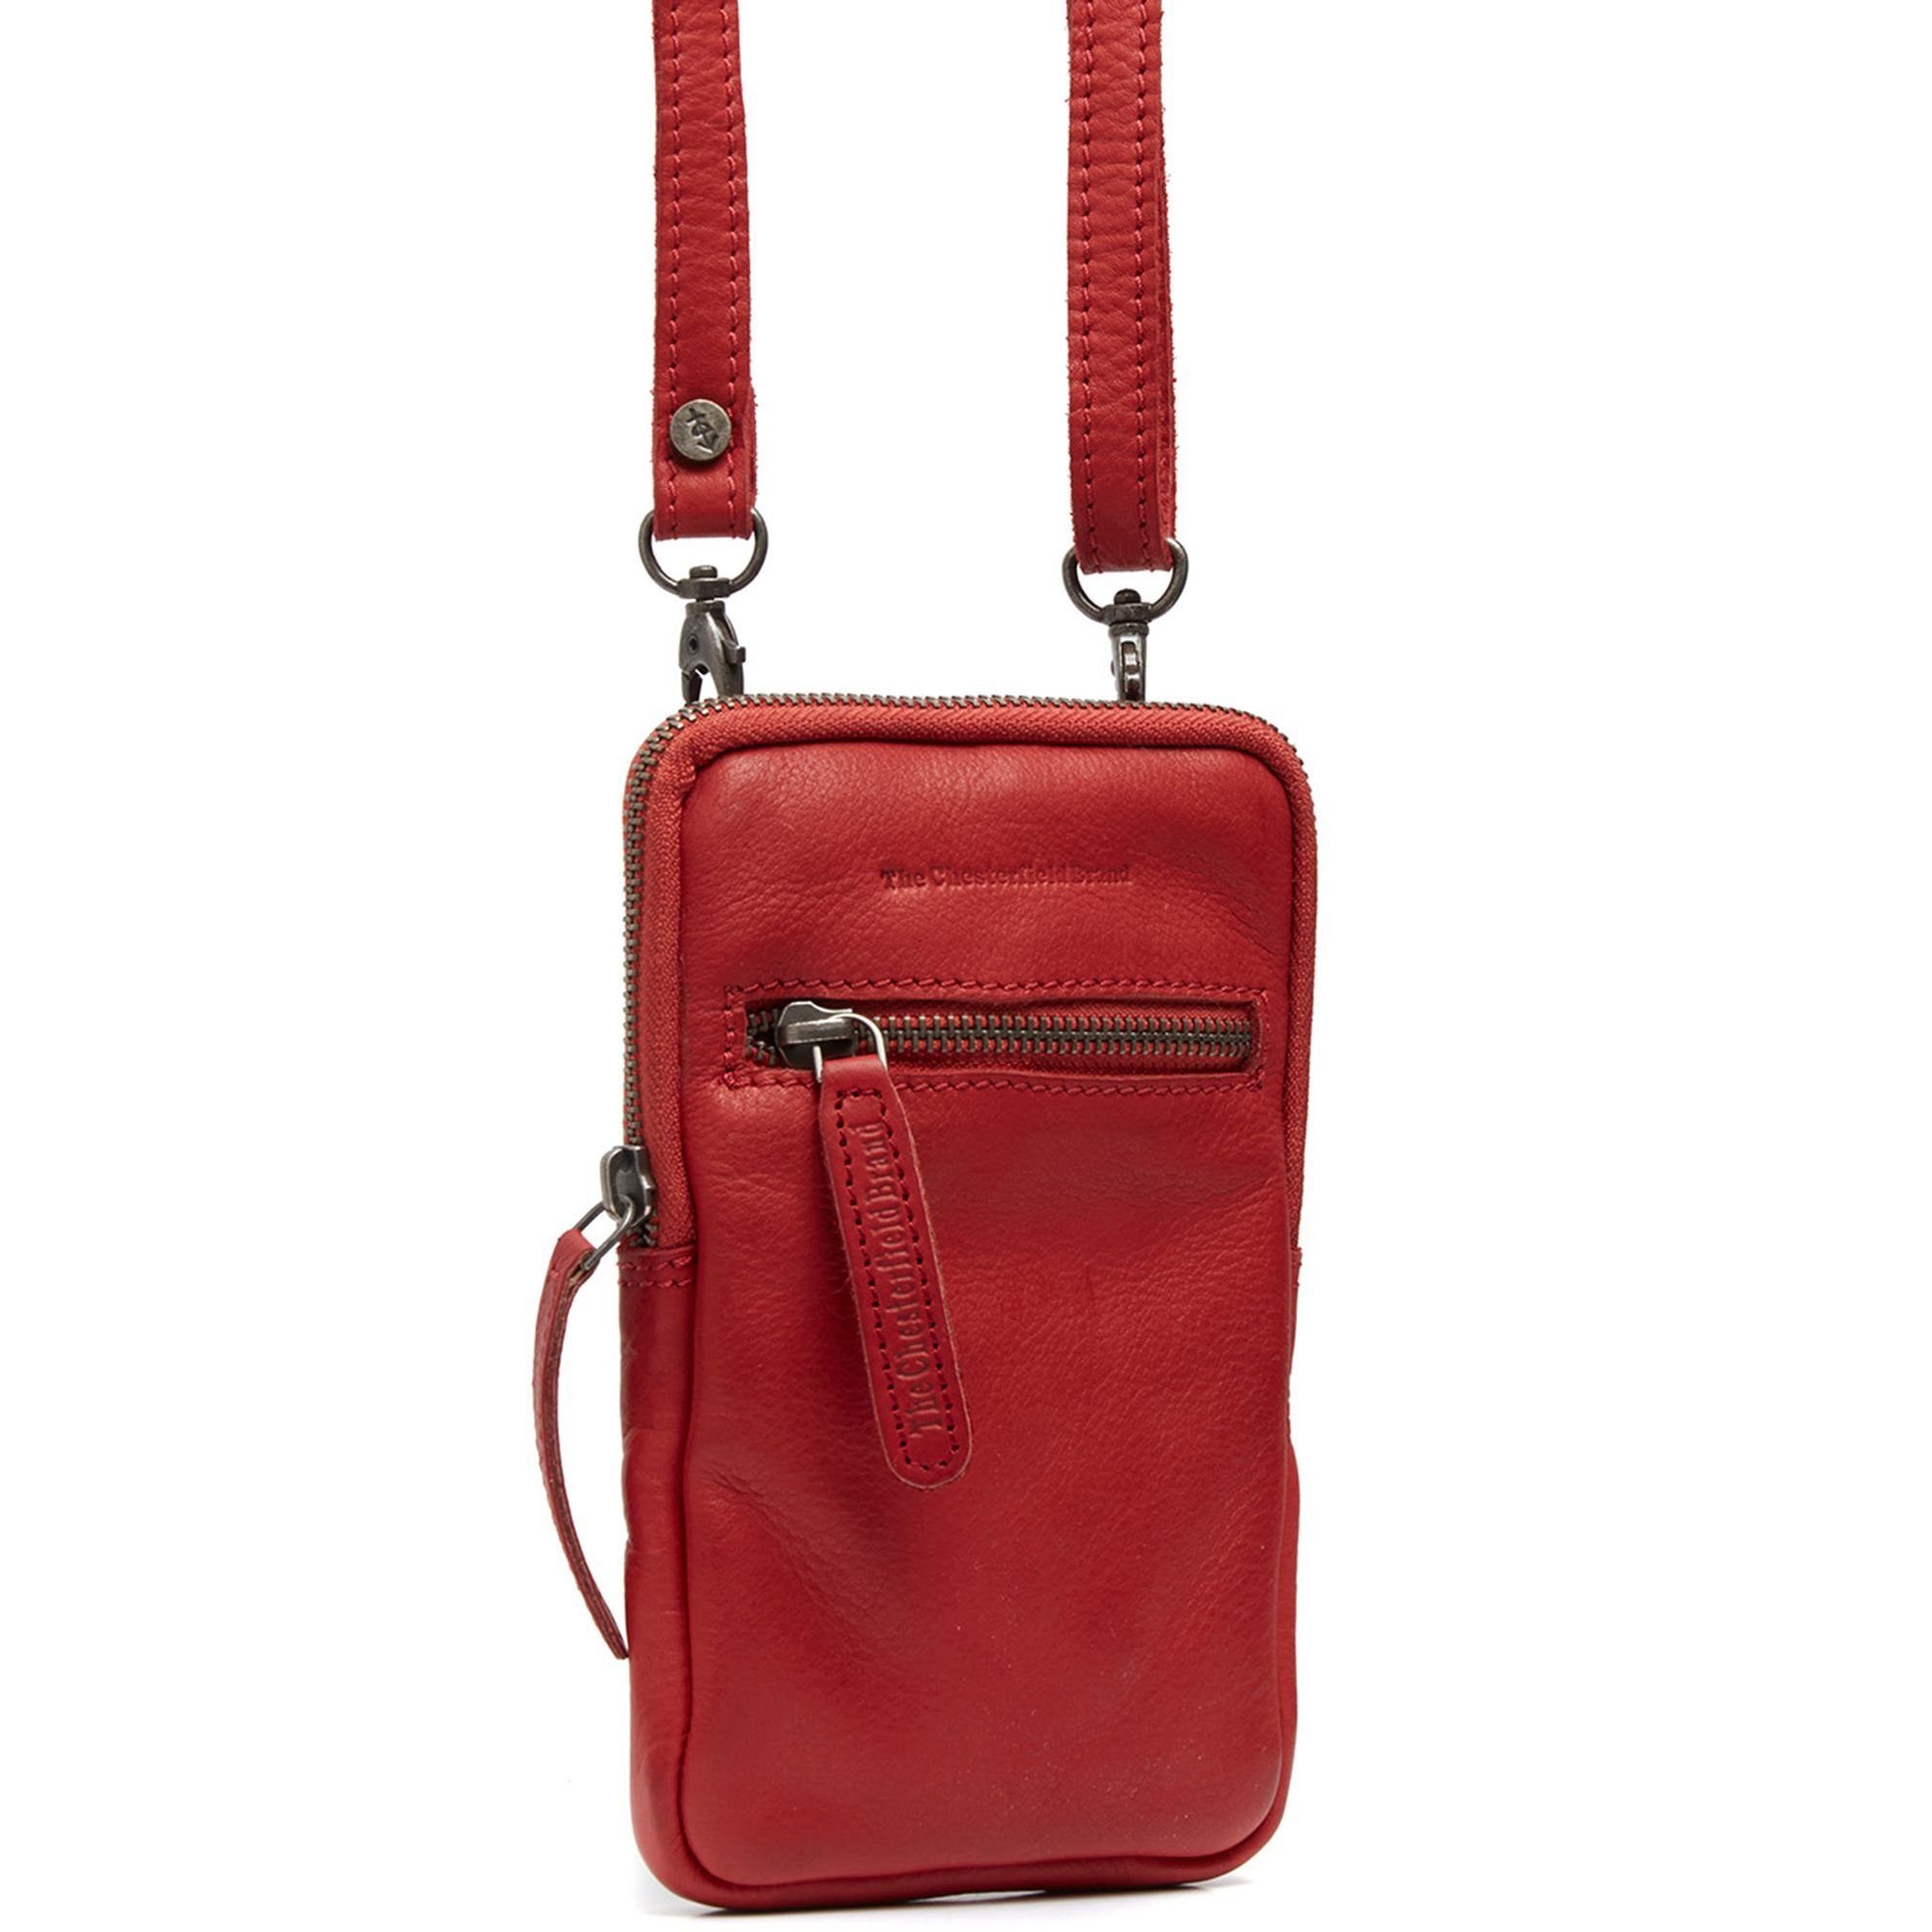 The Chesterfield Brand Leder Smartphone-Hülle, red